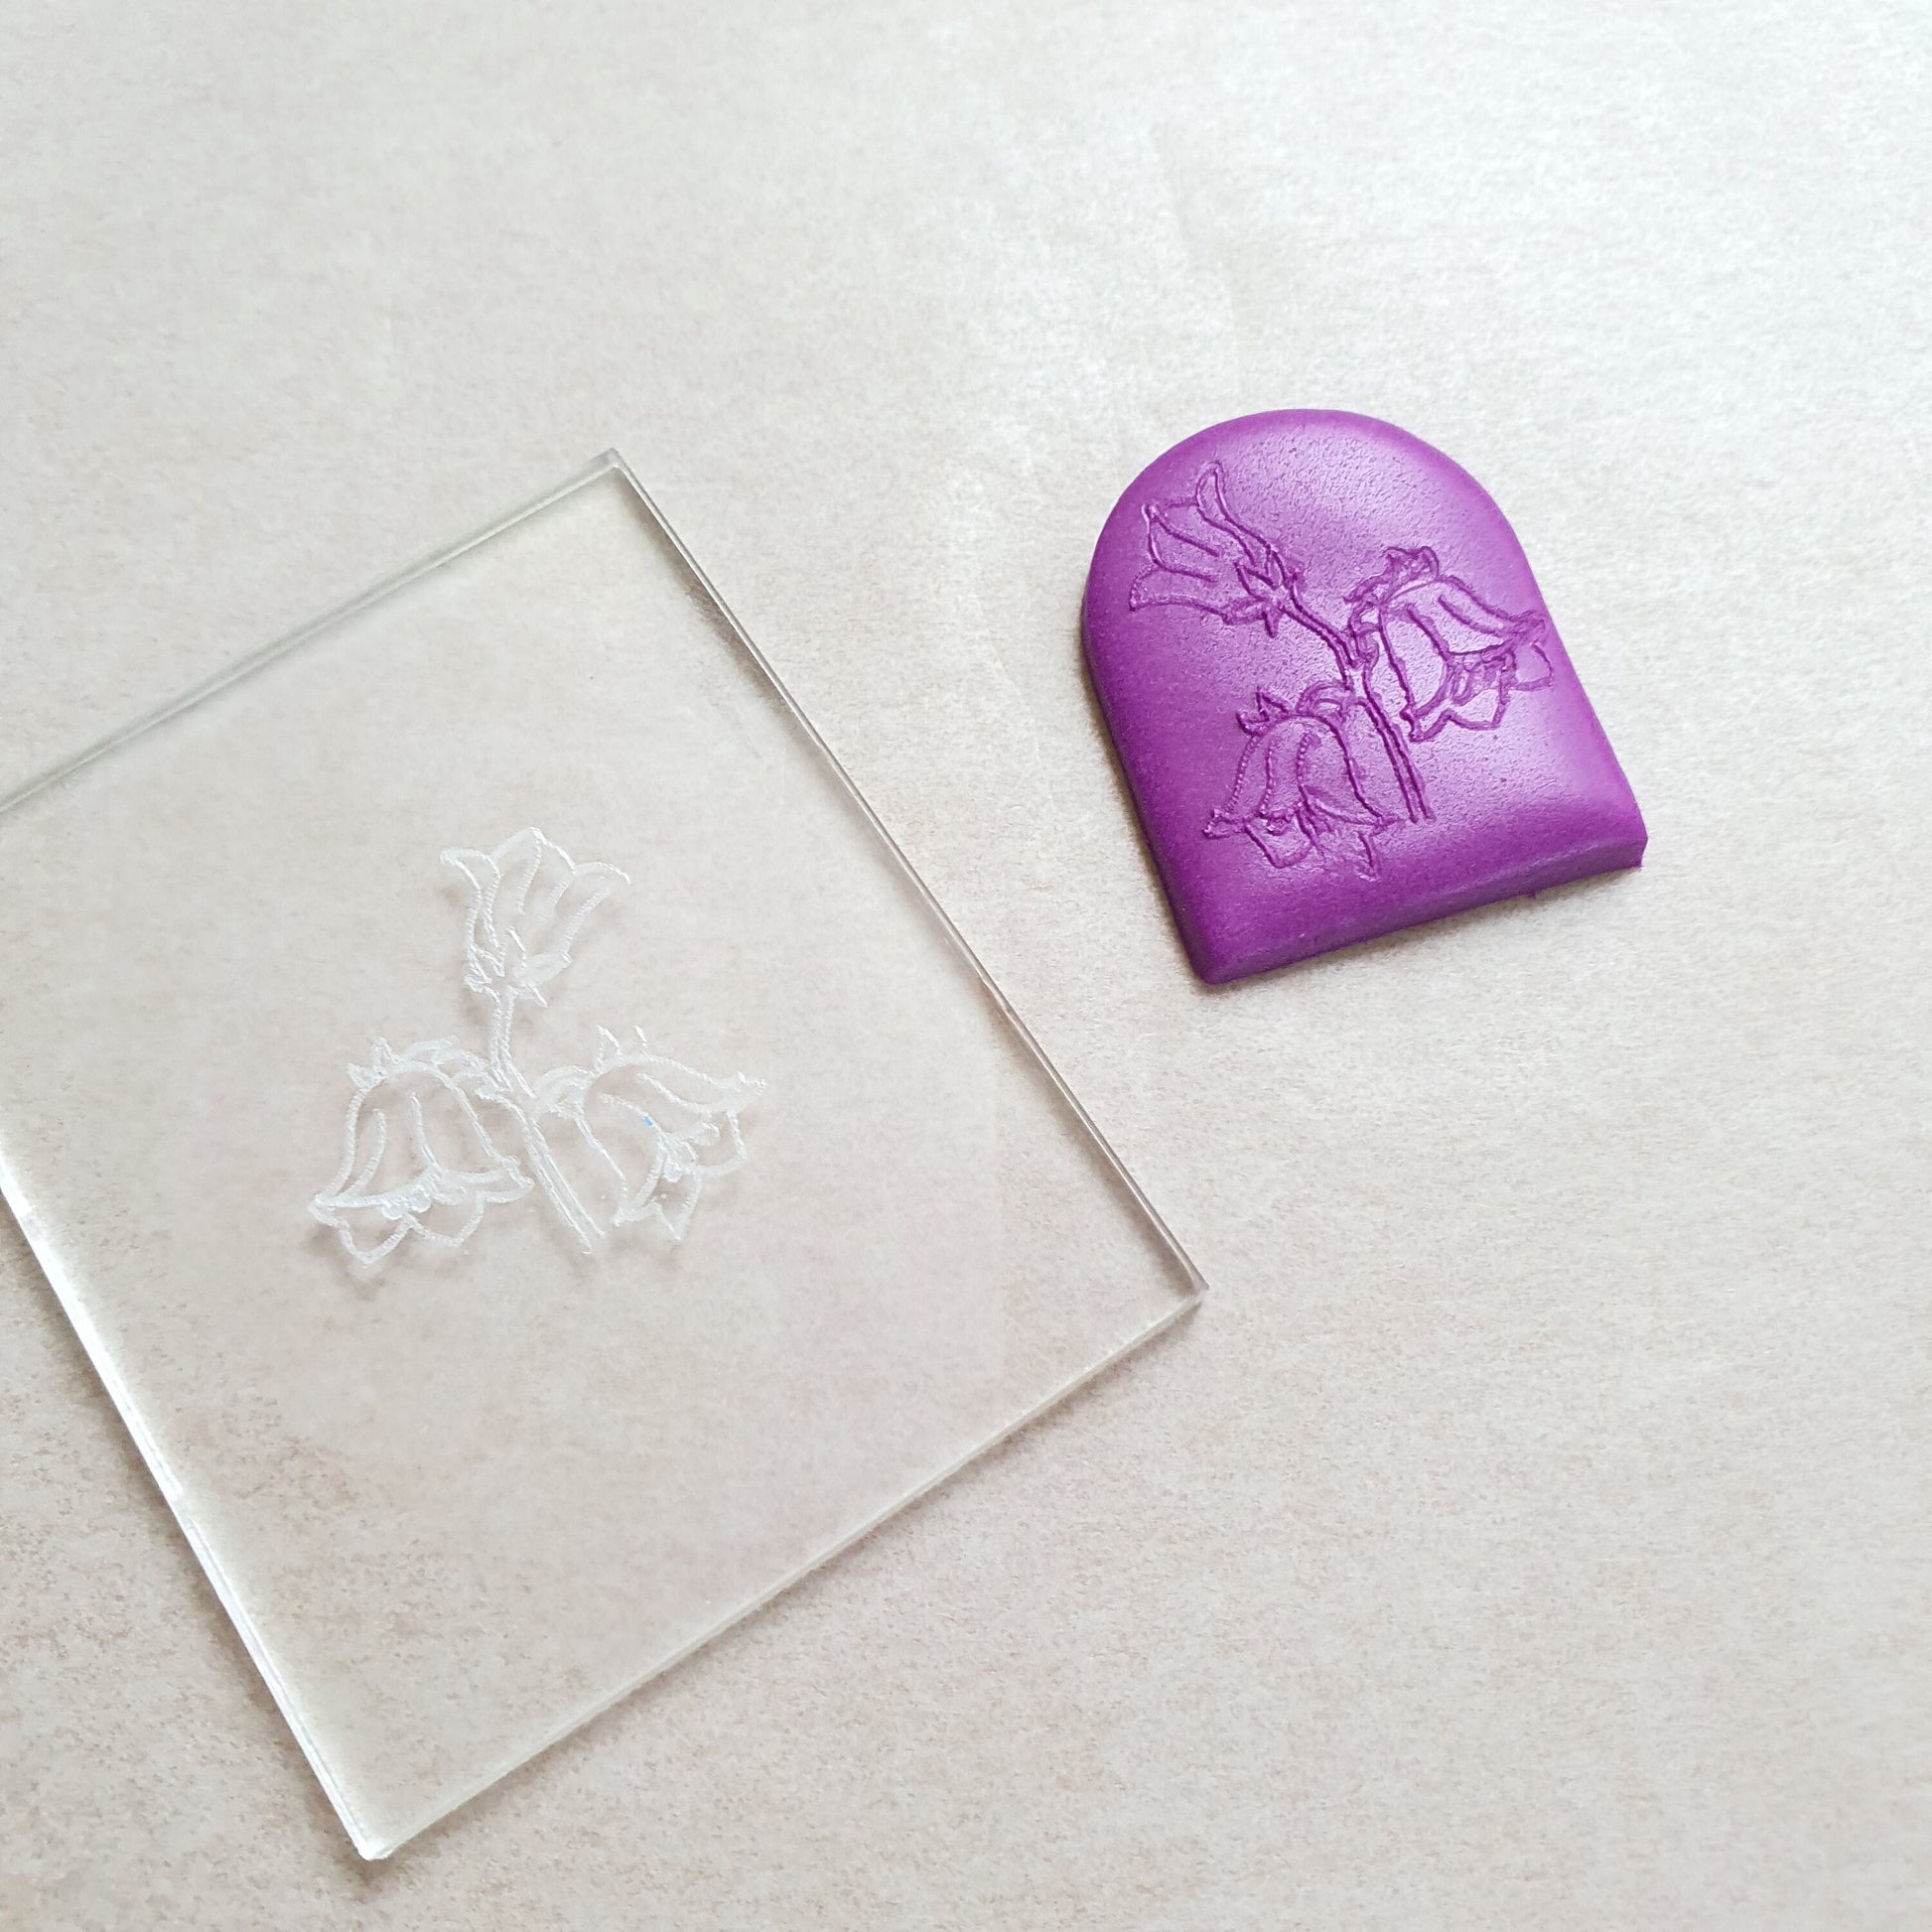 Embossing stamp for polymer clay "Blue bell" Floral texture plate Flower debossing stamp Acrylic stamps